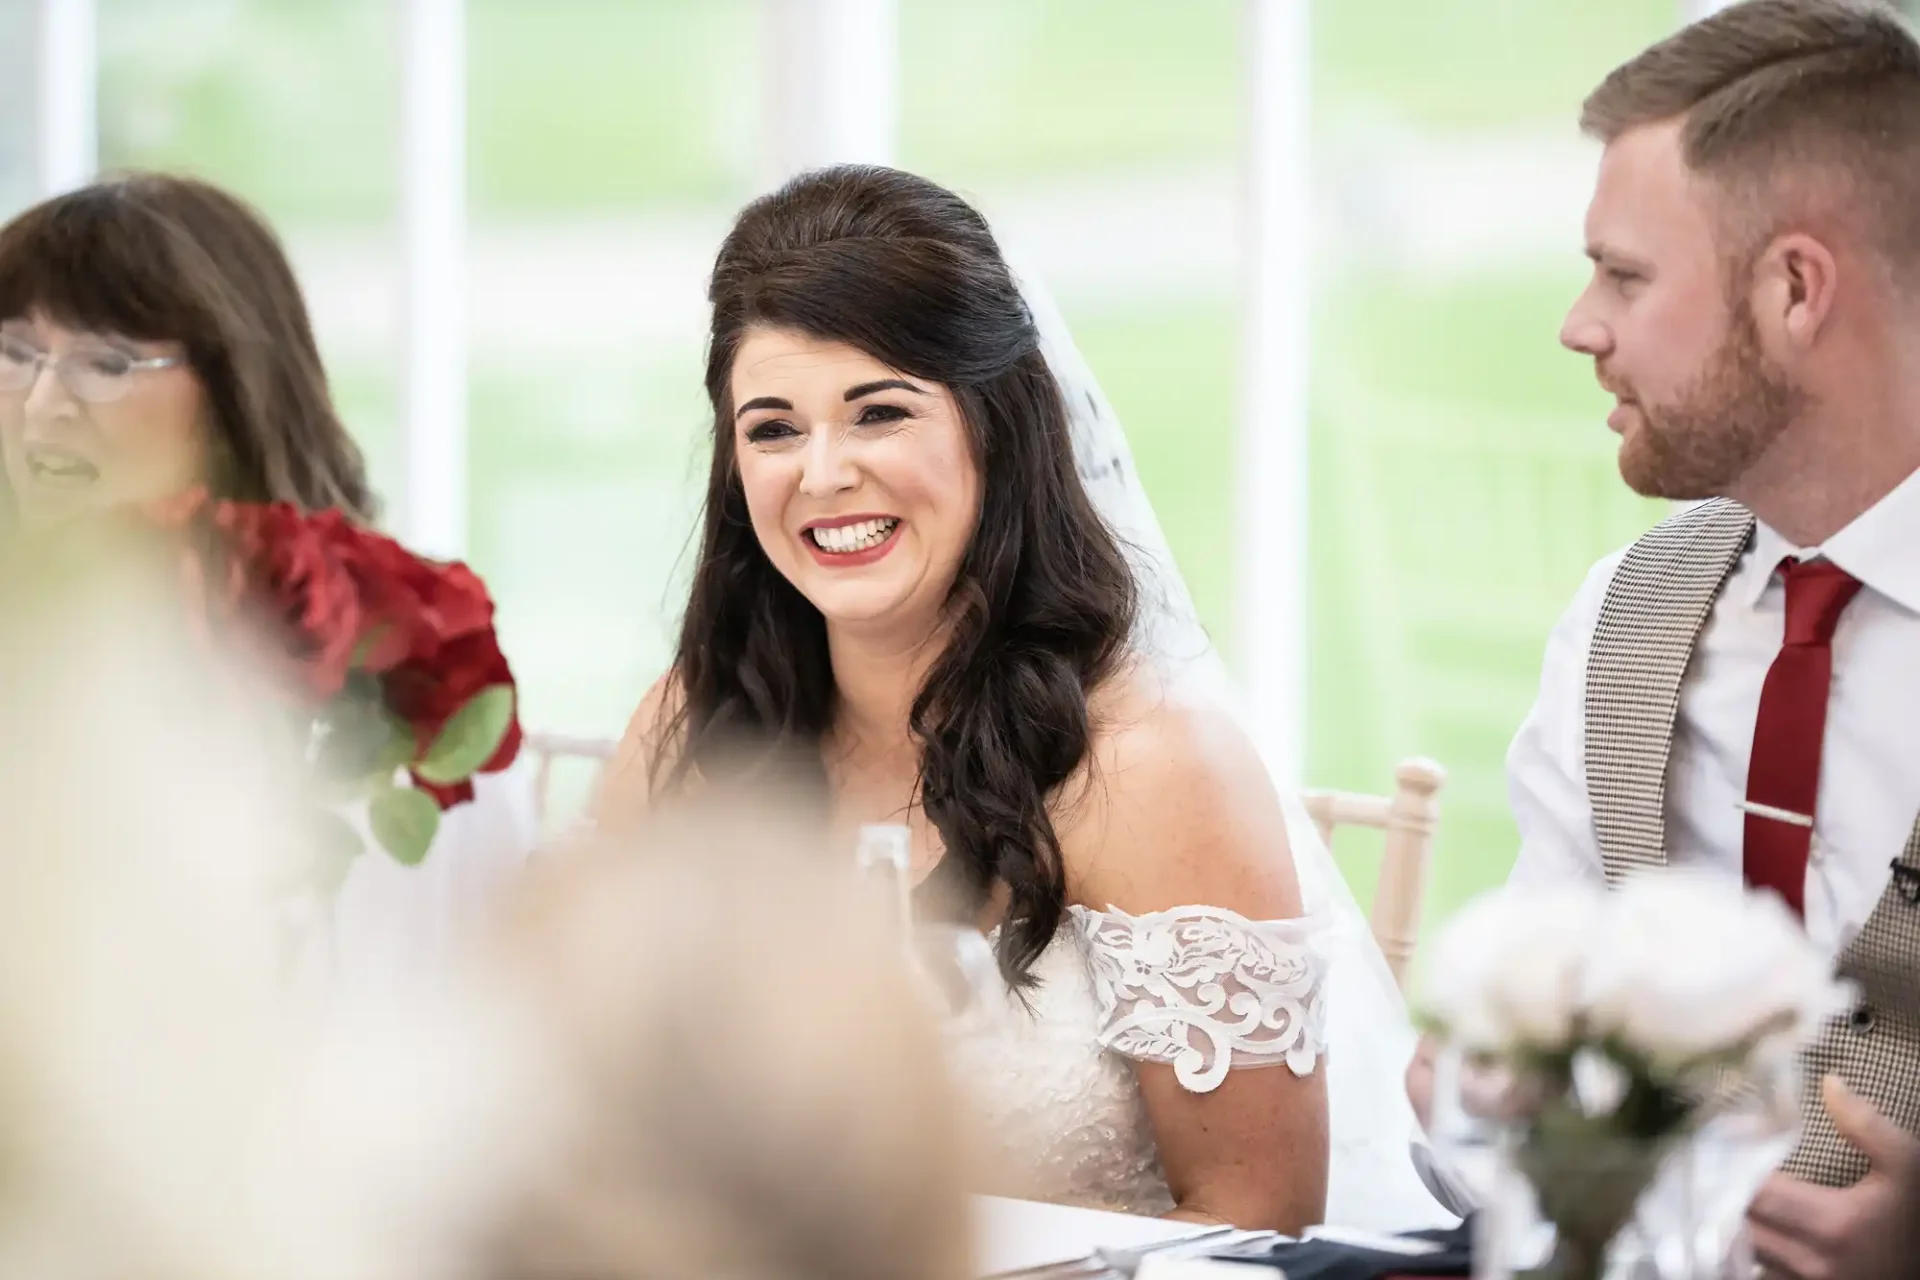 A bride in a white off-shoulder wedding dress laughs joyfully at a table during a wedding reception, with guests nearby.